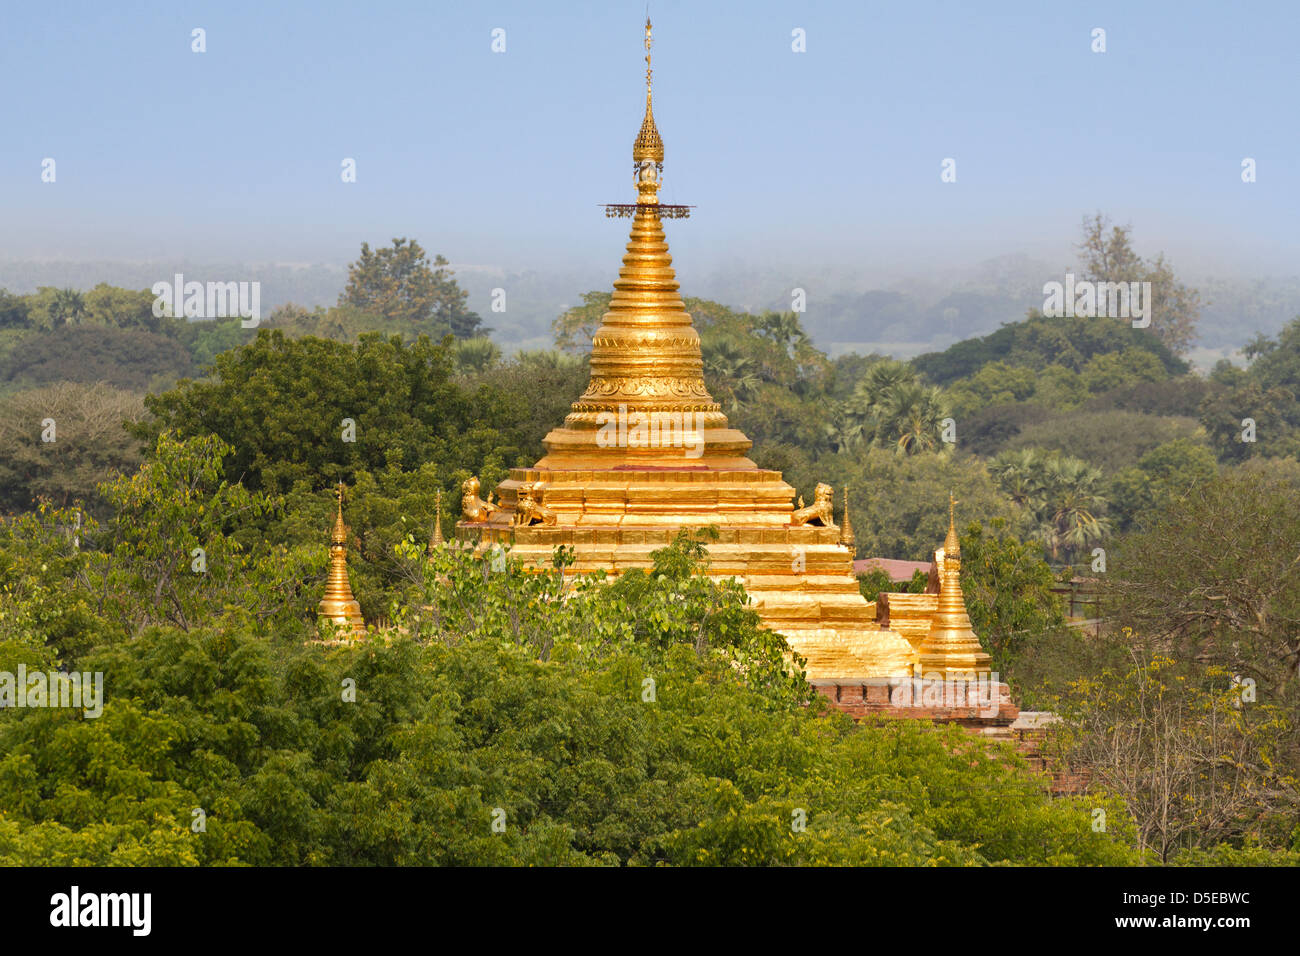 The Temples and Pagodas of Bagan, Myanmar - early morning 14 Stock Photo